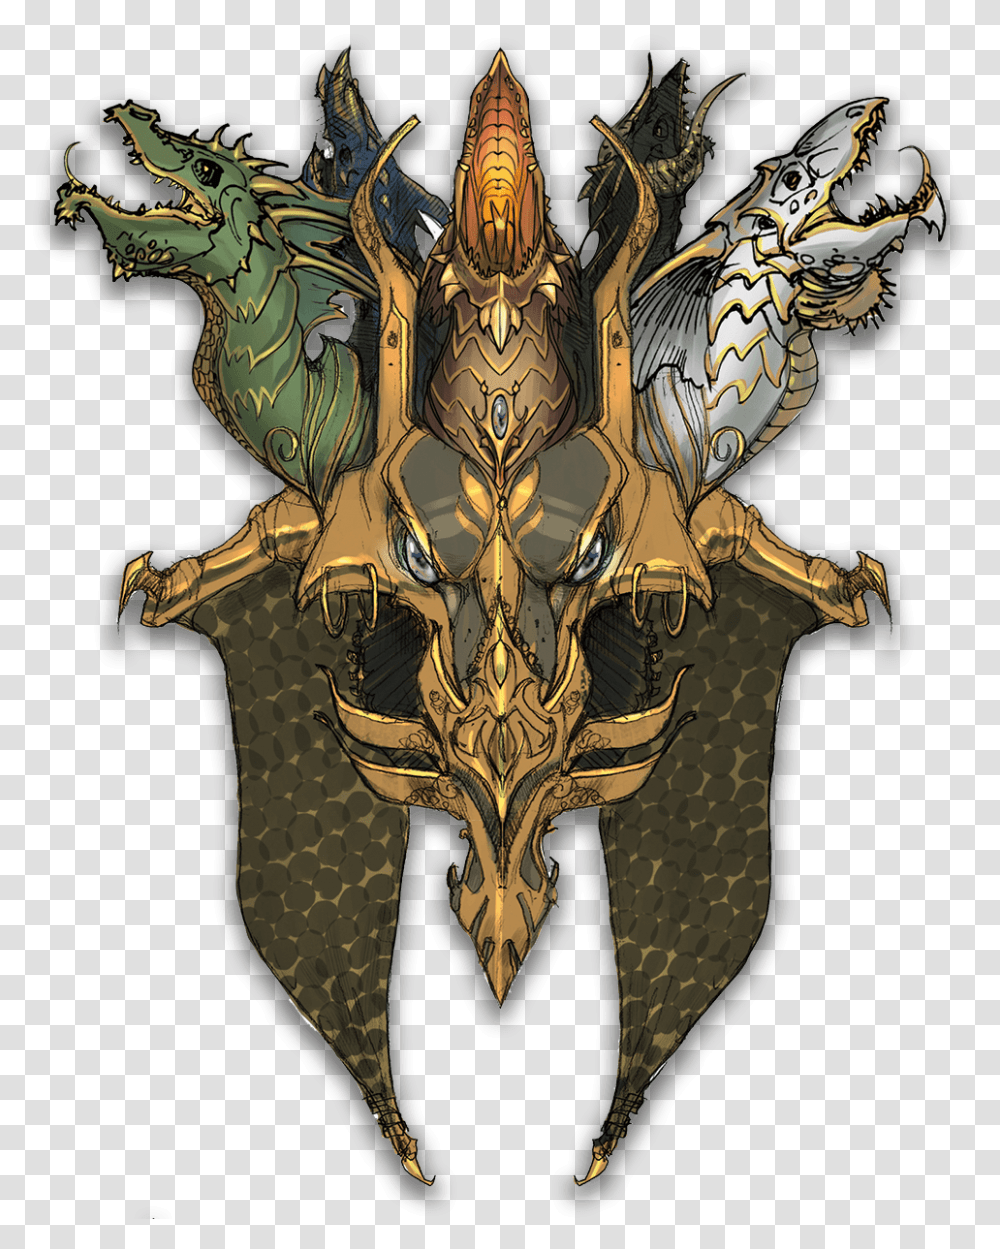 Hoard Of The Dragon Queen 5etools Mask Of The Dragon Queen, Armor, Cross, Symbol, Painting Transparent Png